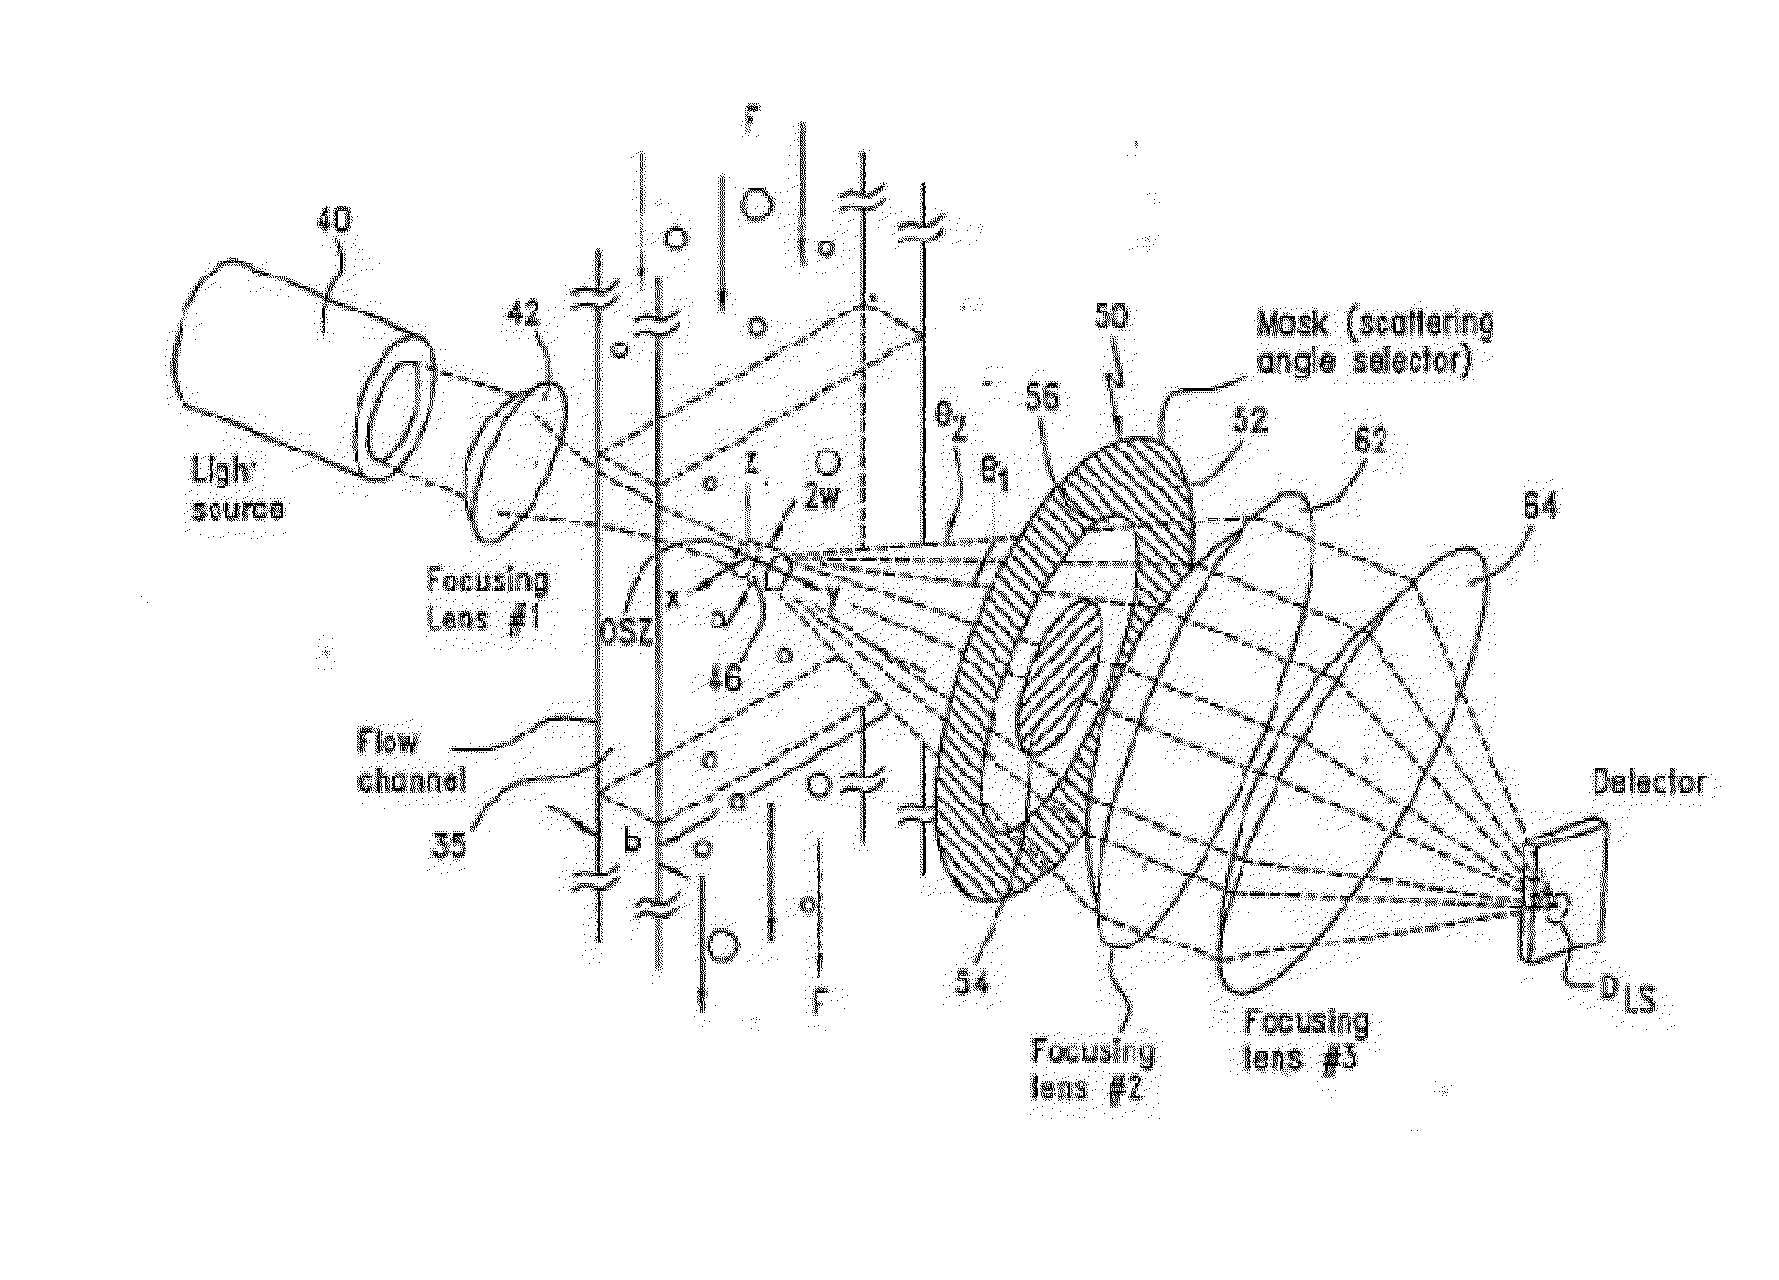 Instrument and method for optical particle sensing